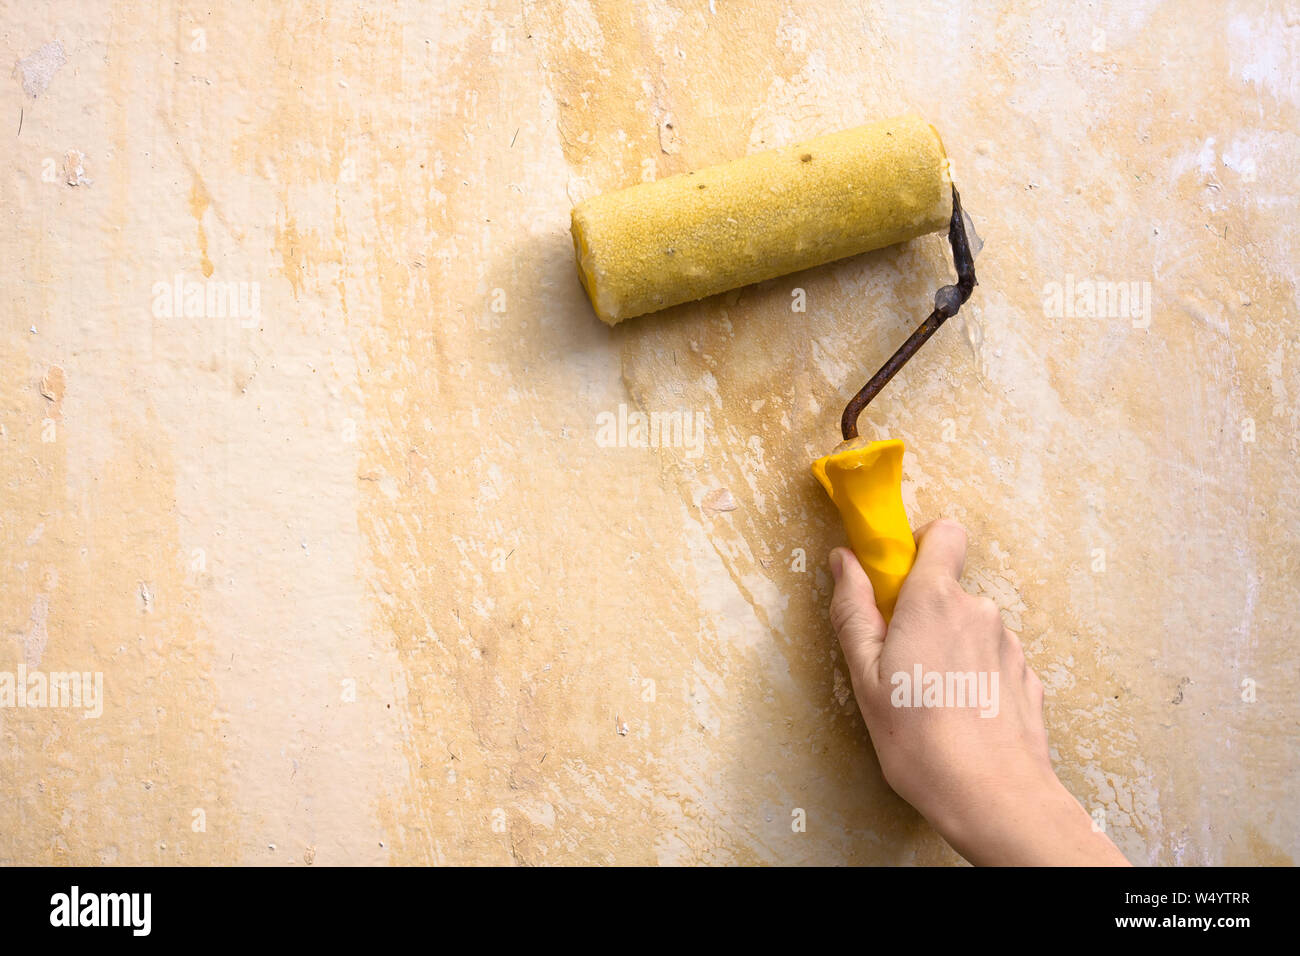 hand smearing wall with glue for wallpaper, closeup Stock Photo